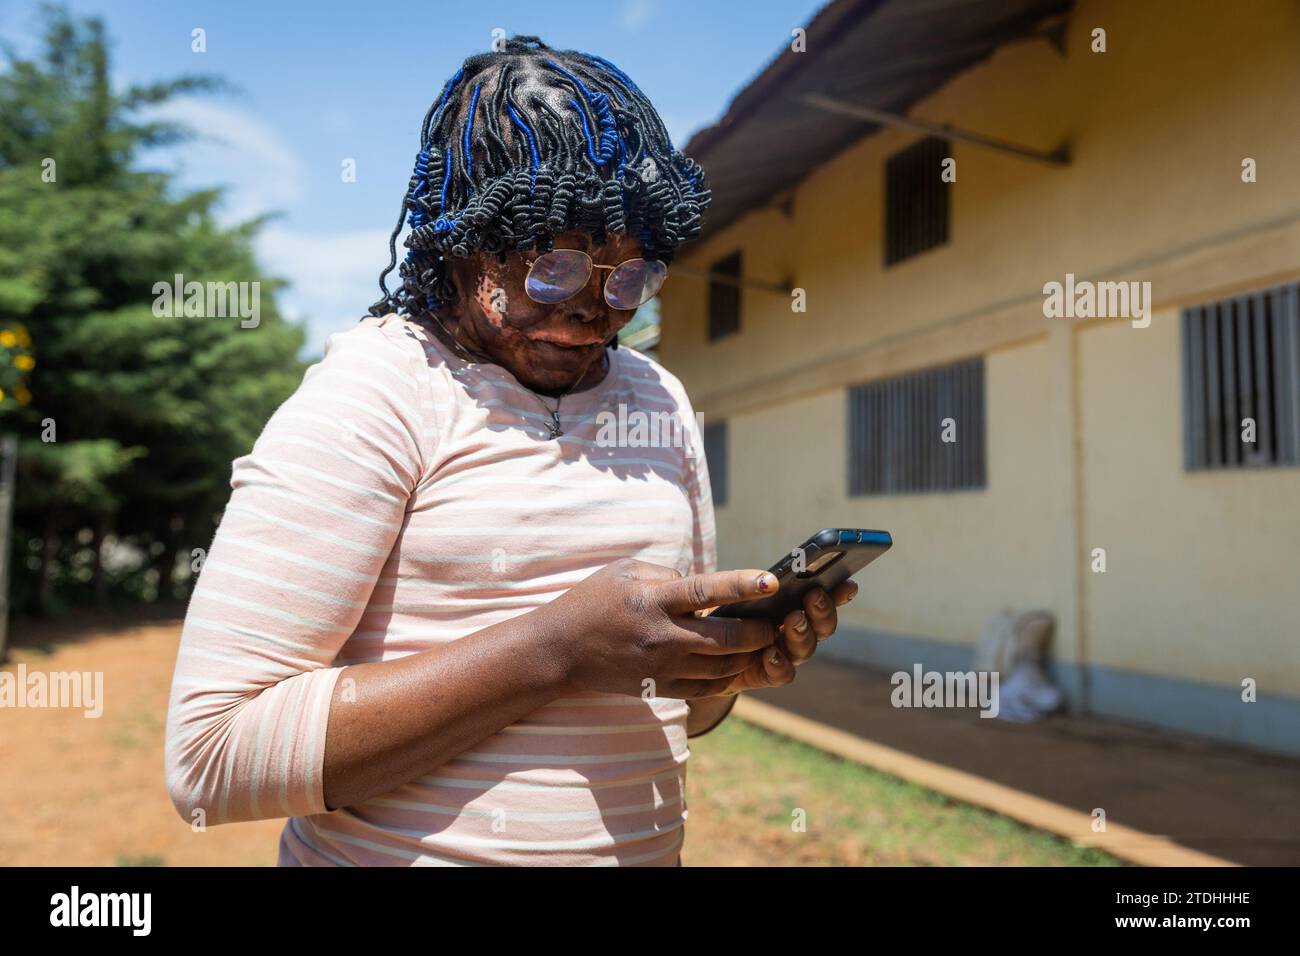 Young African burned face girl on her smartphone writing messages. Stock Photo